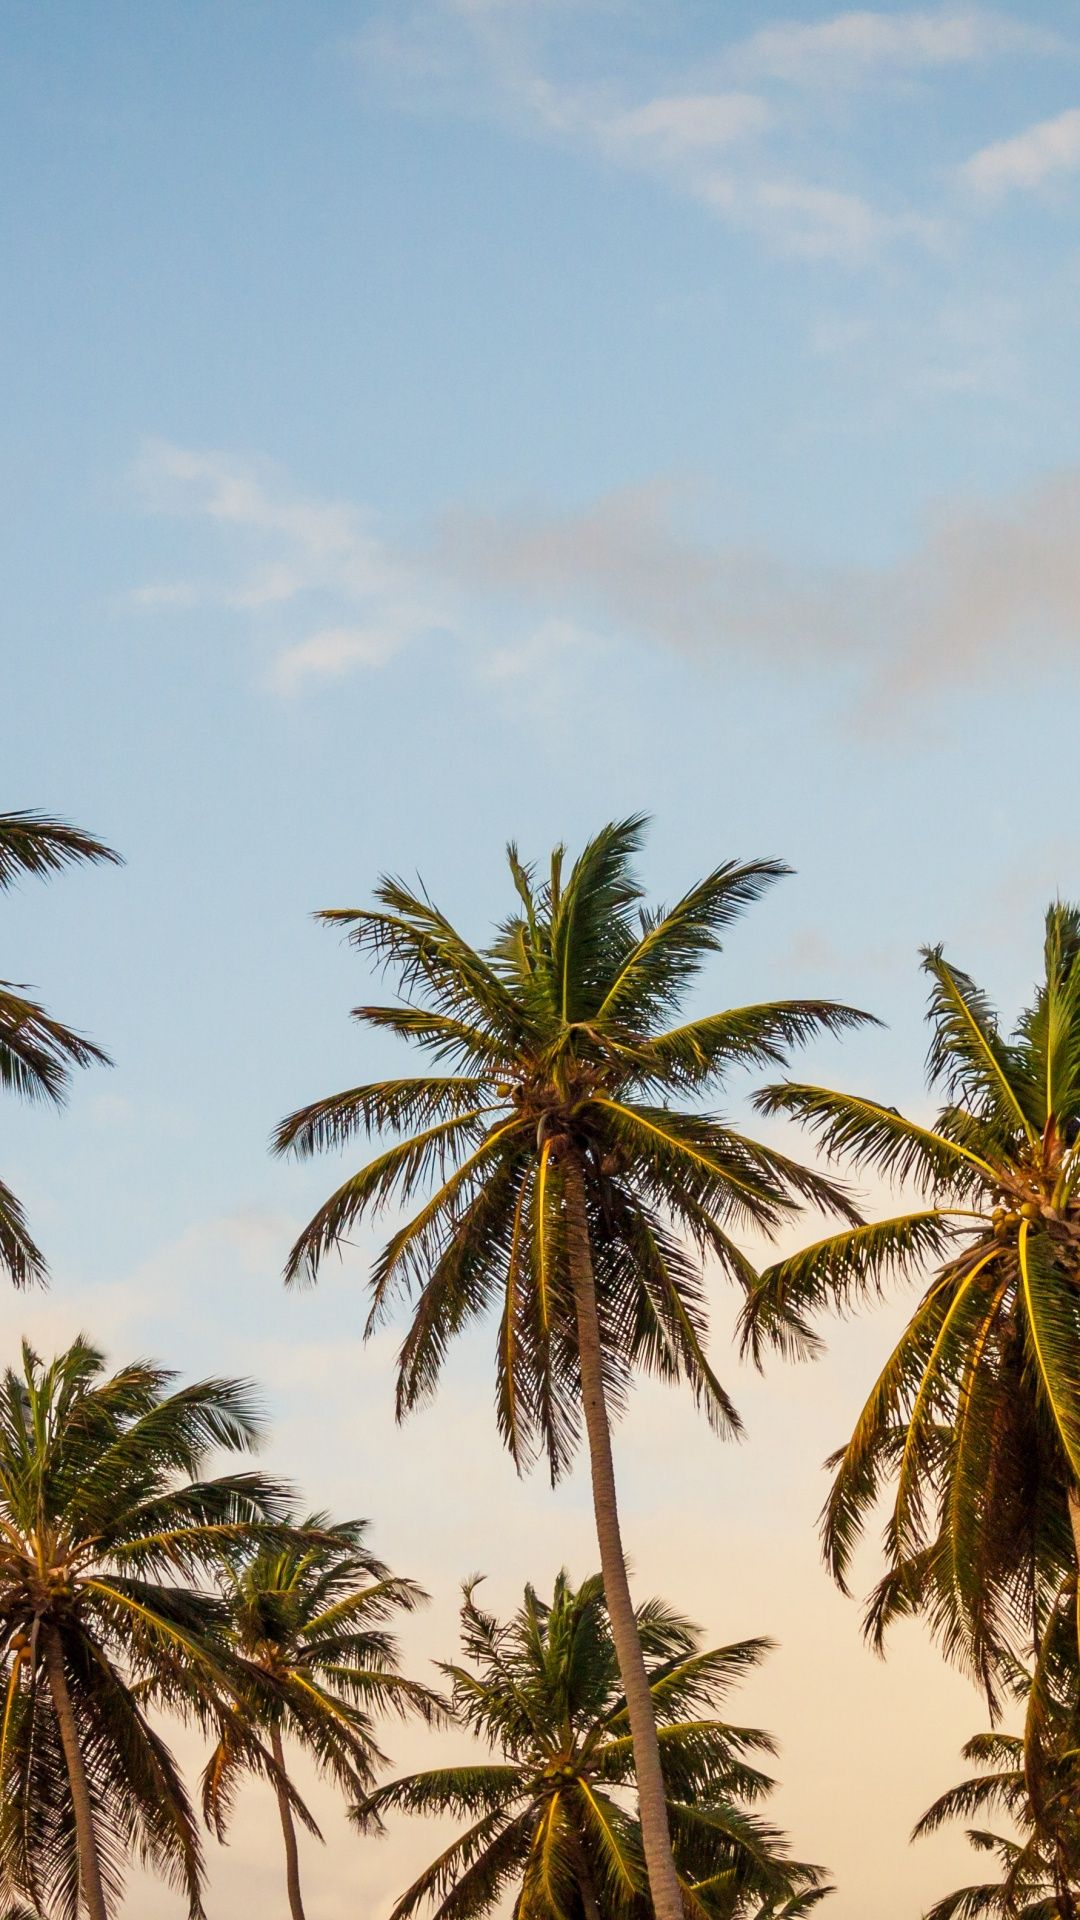 A group of palm trees with a blue sky in the background - California